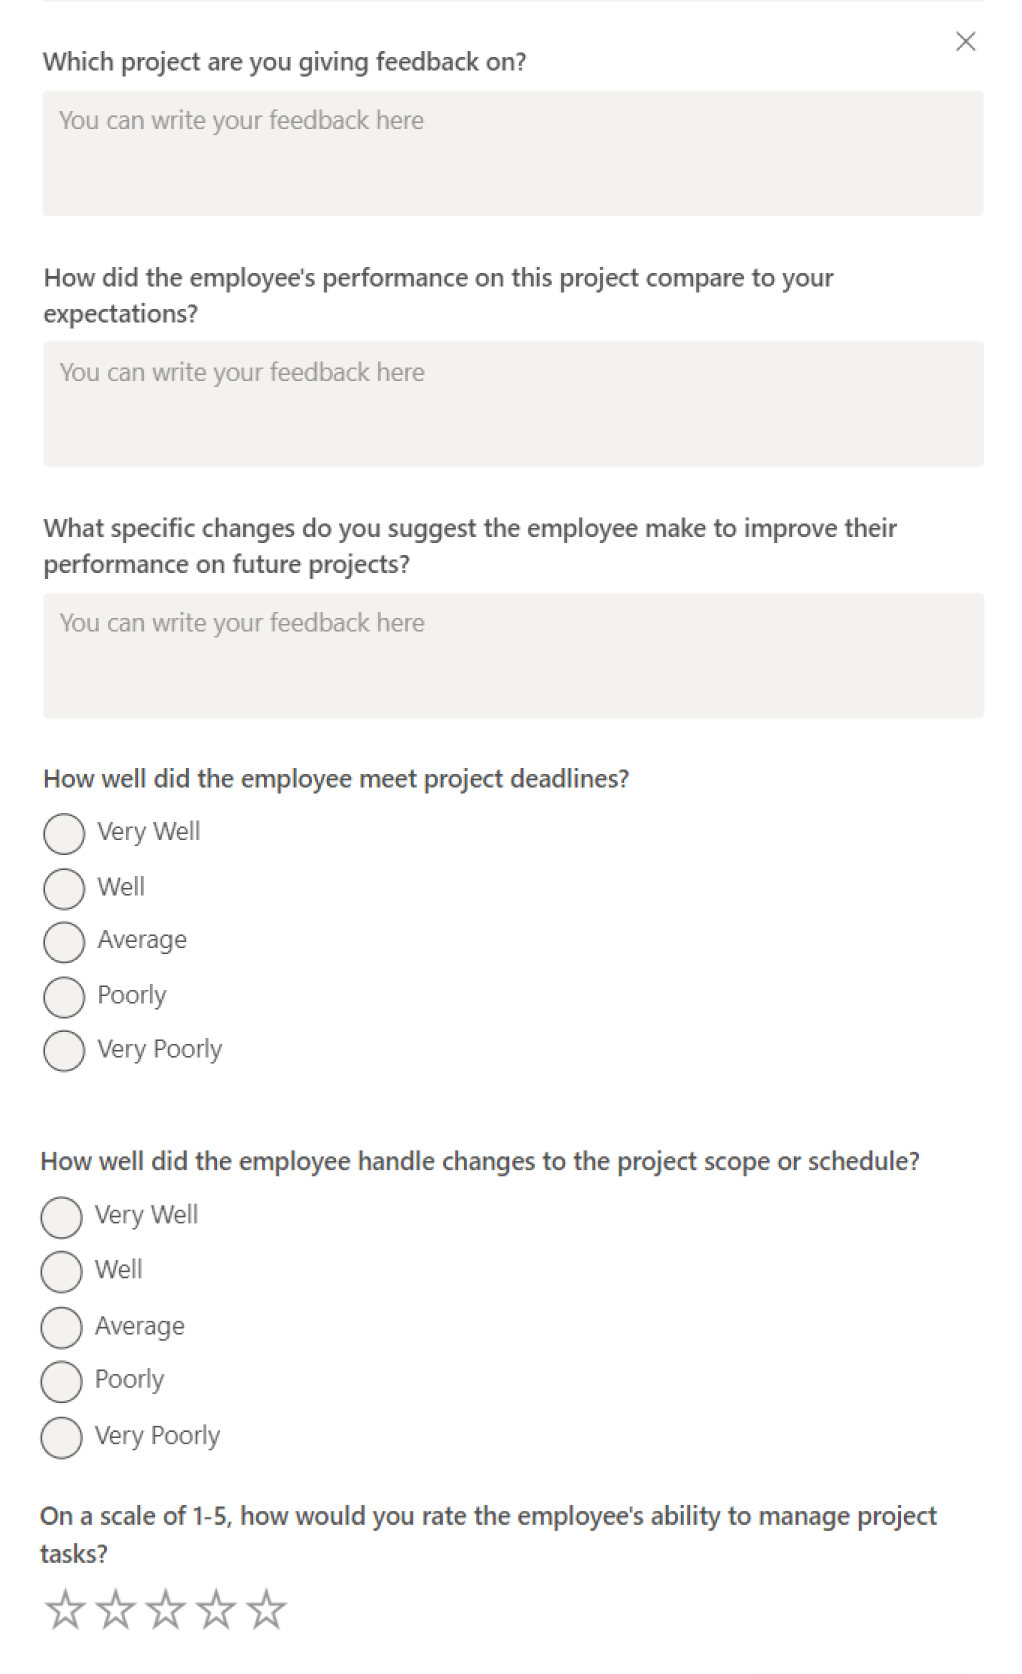 teamflect project based feedback template with questions